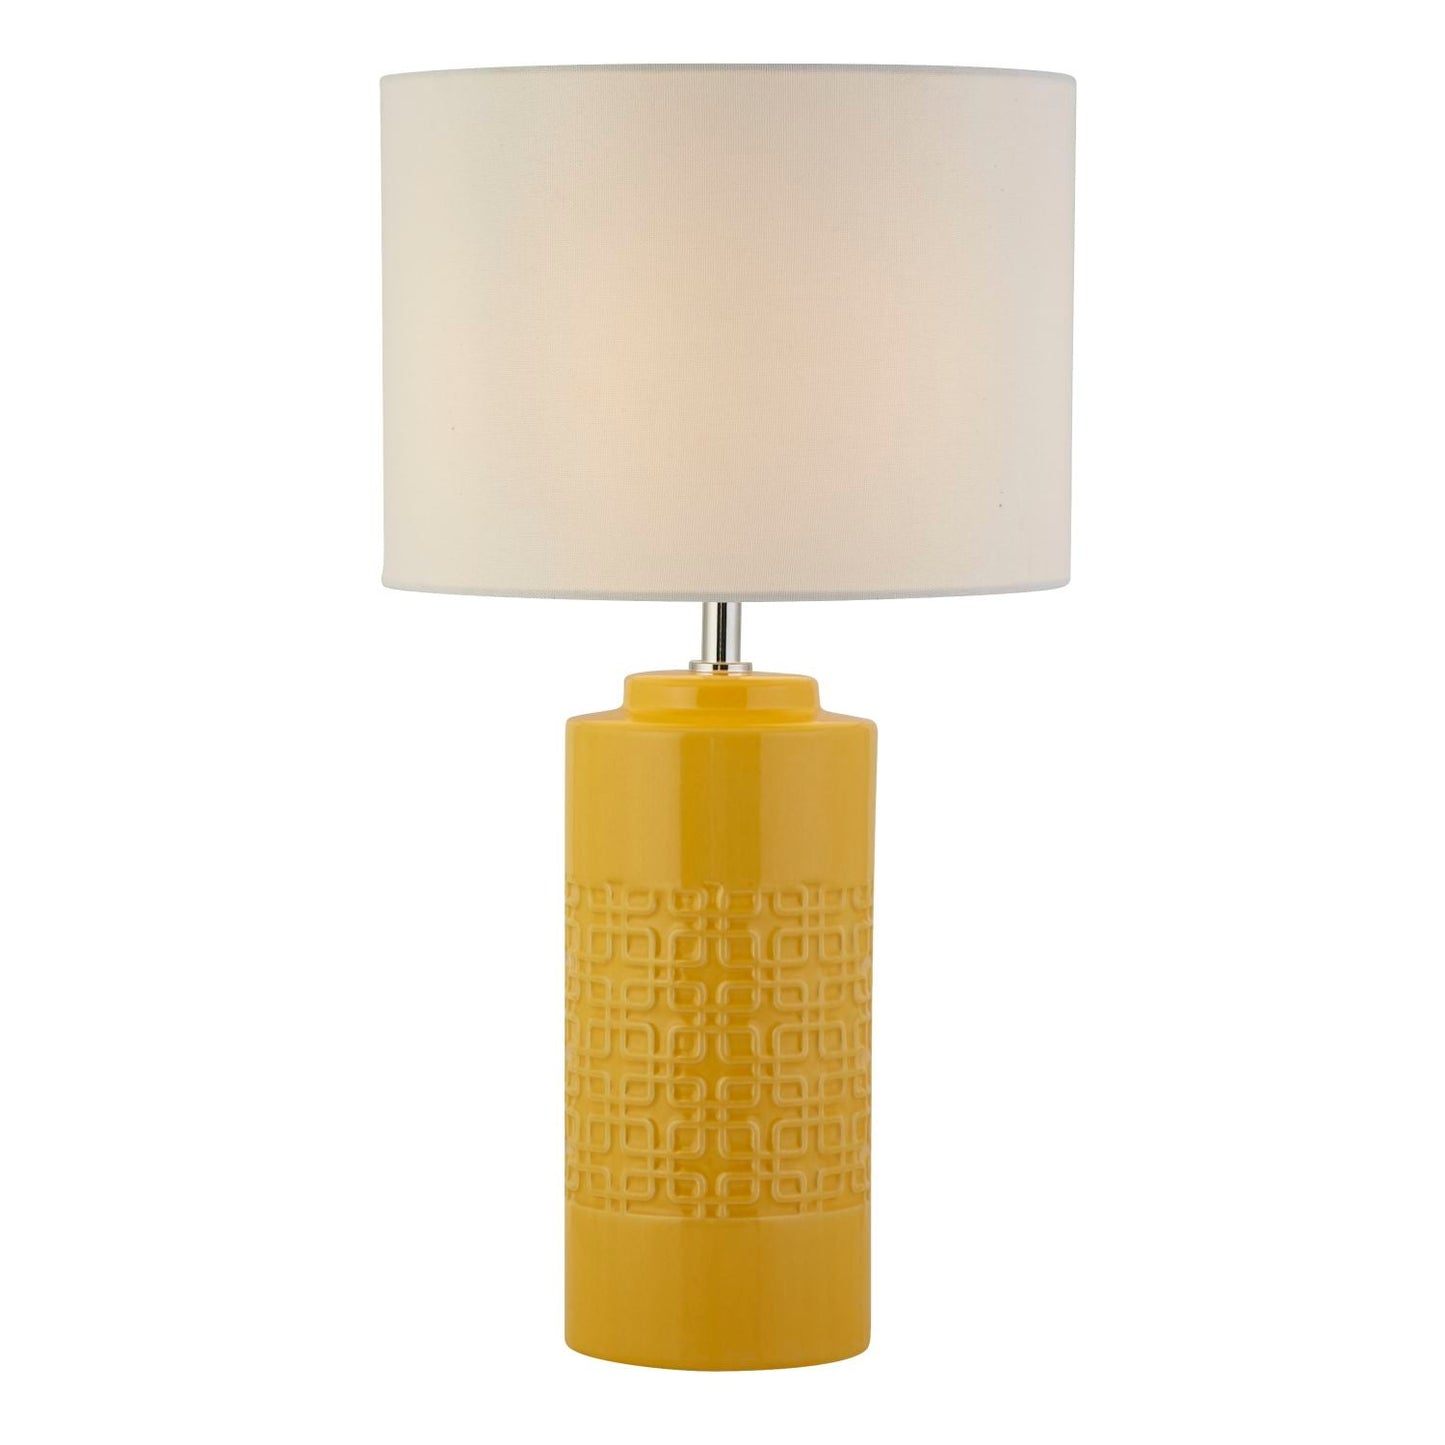 Ochre Textured Ceramic Table Lamp with White Shade